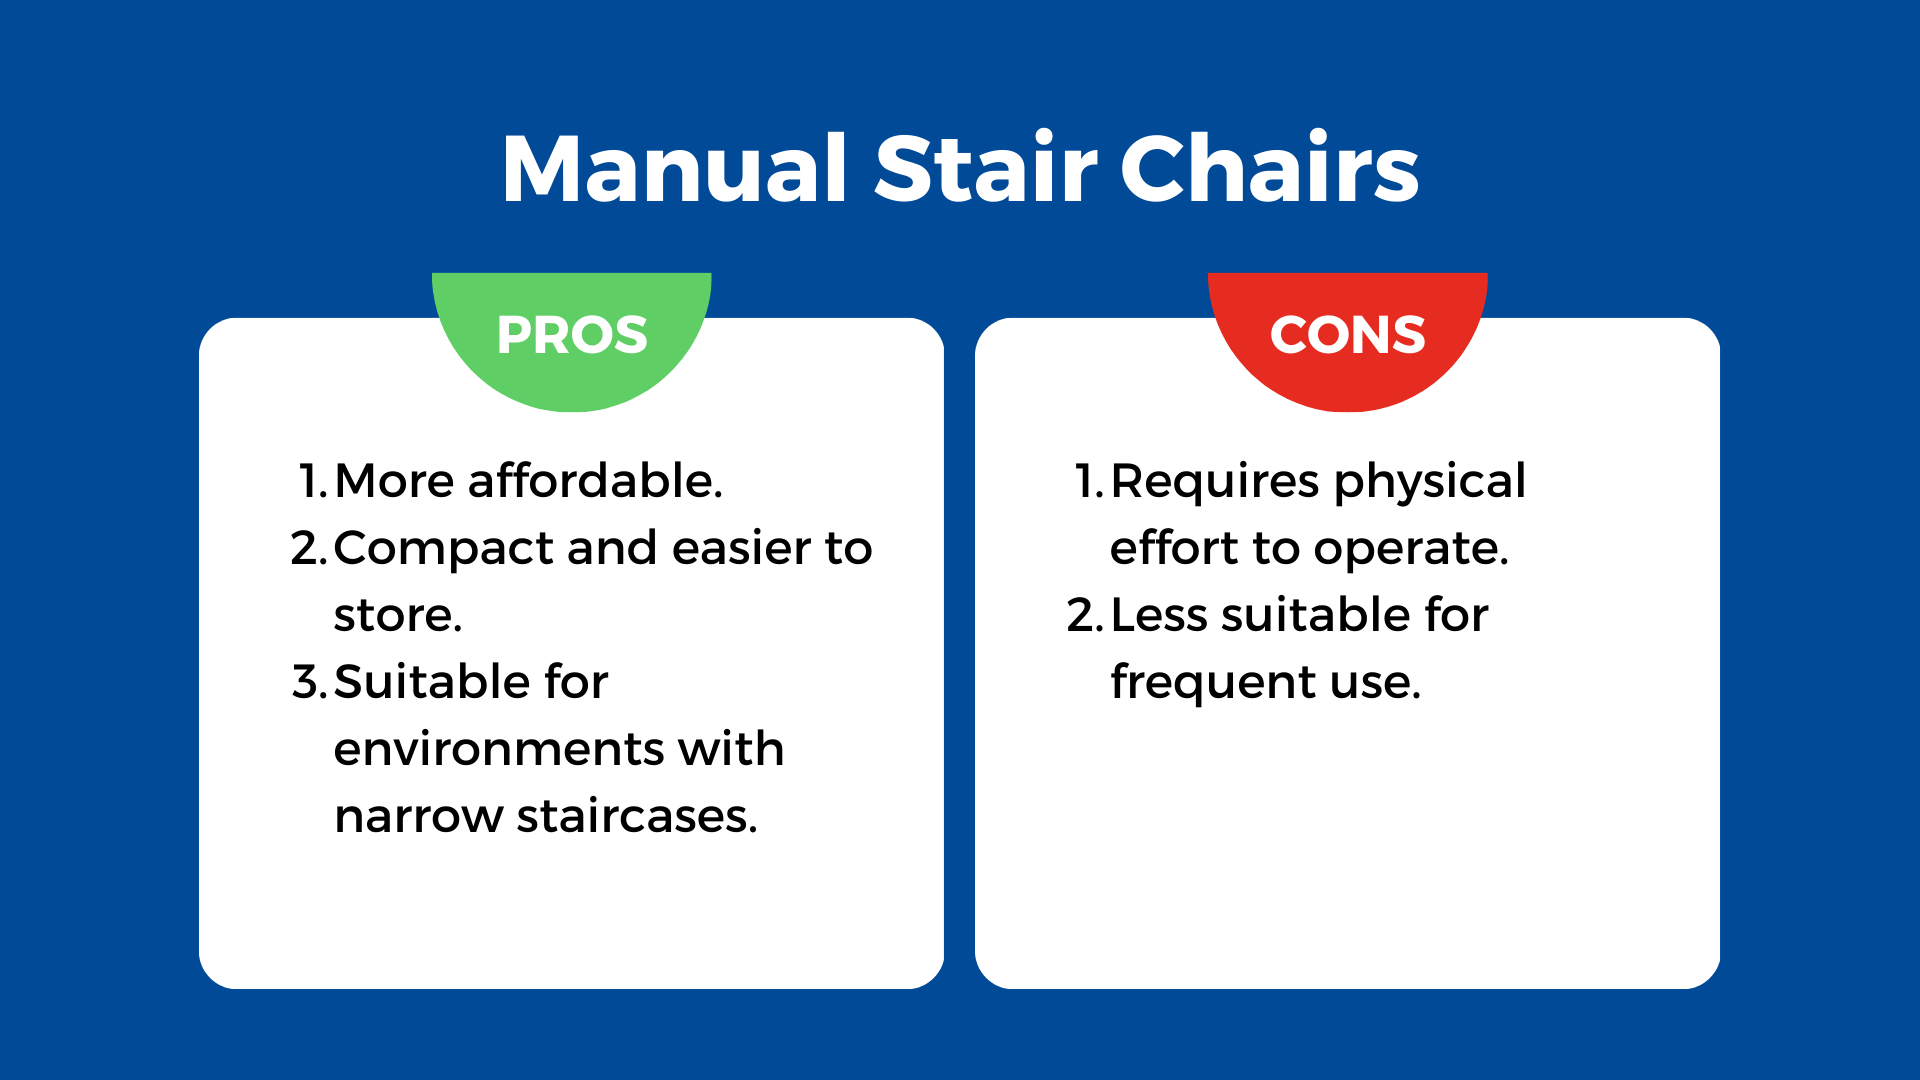 pros and cons of manual stair chair